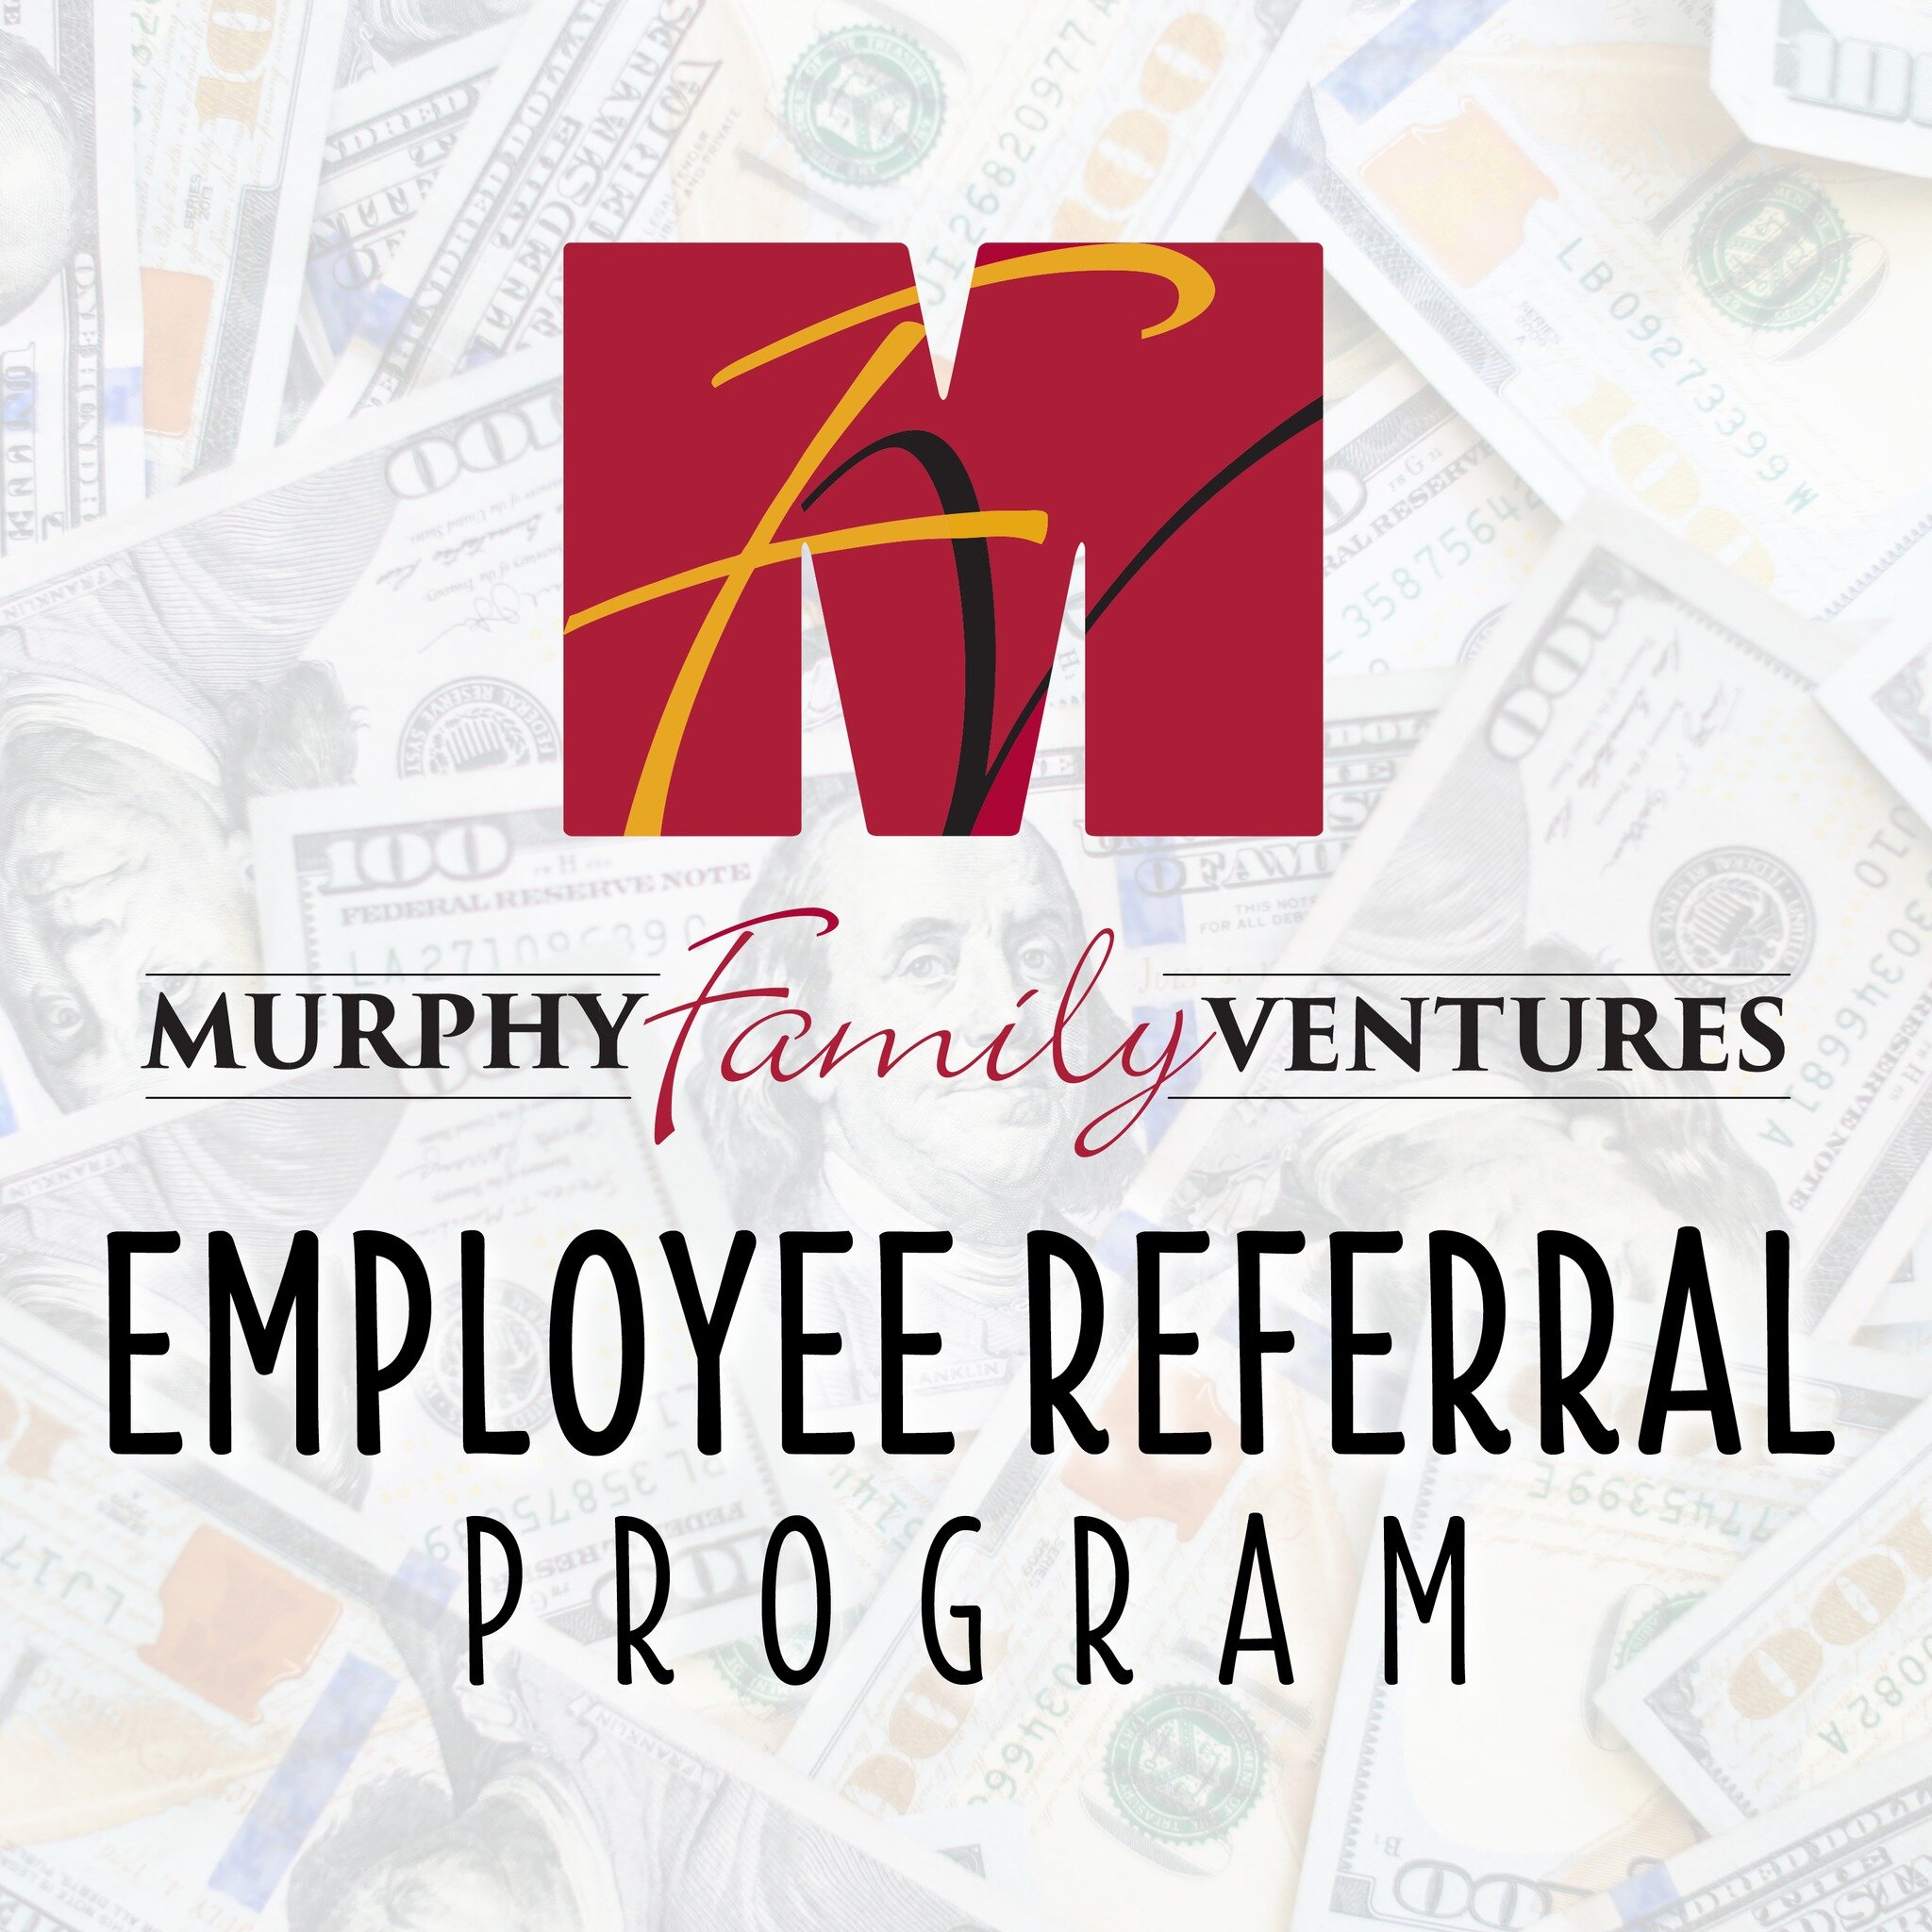 Employees, refer a friend today and you could receive a referral bonus of up to $600! Want to learn more? Visit www.murphyfamilyventures.com/mymfv.